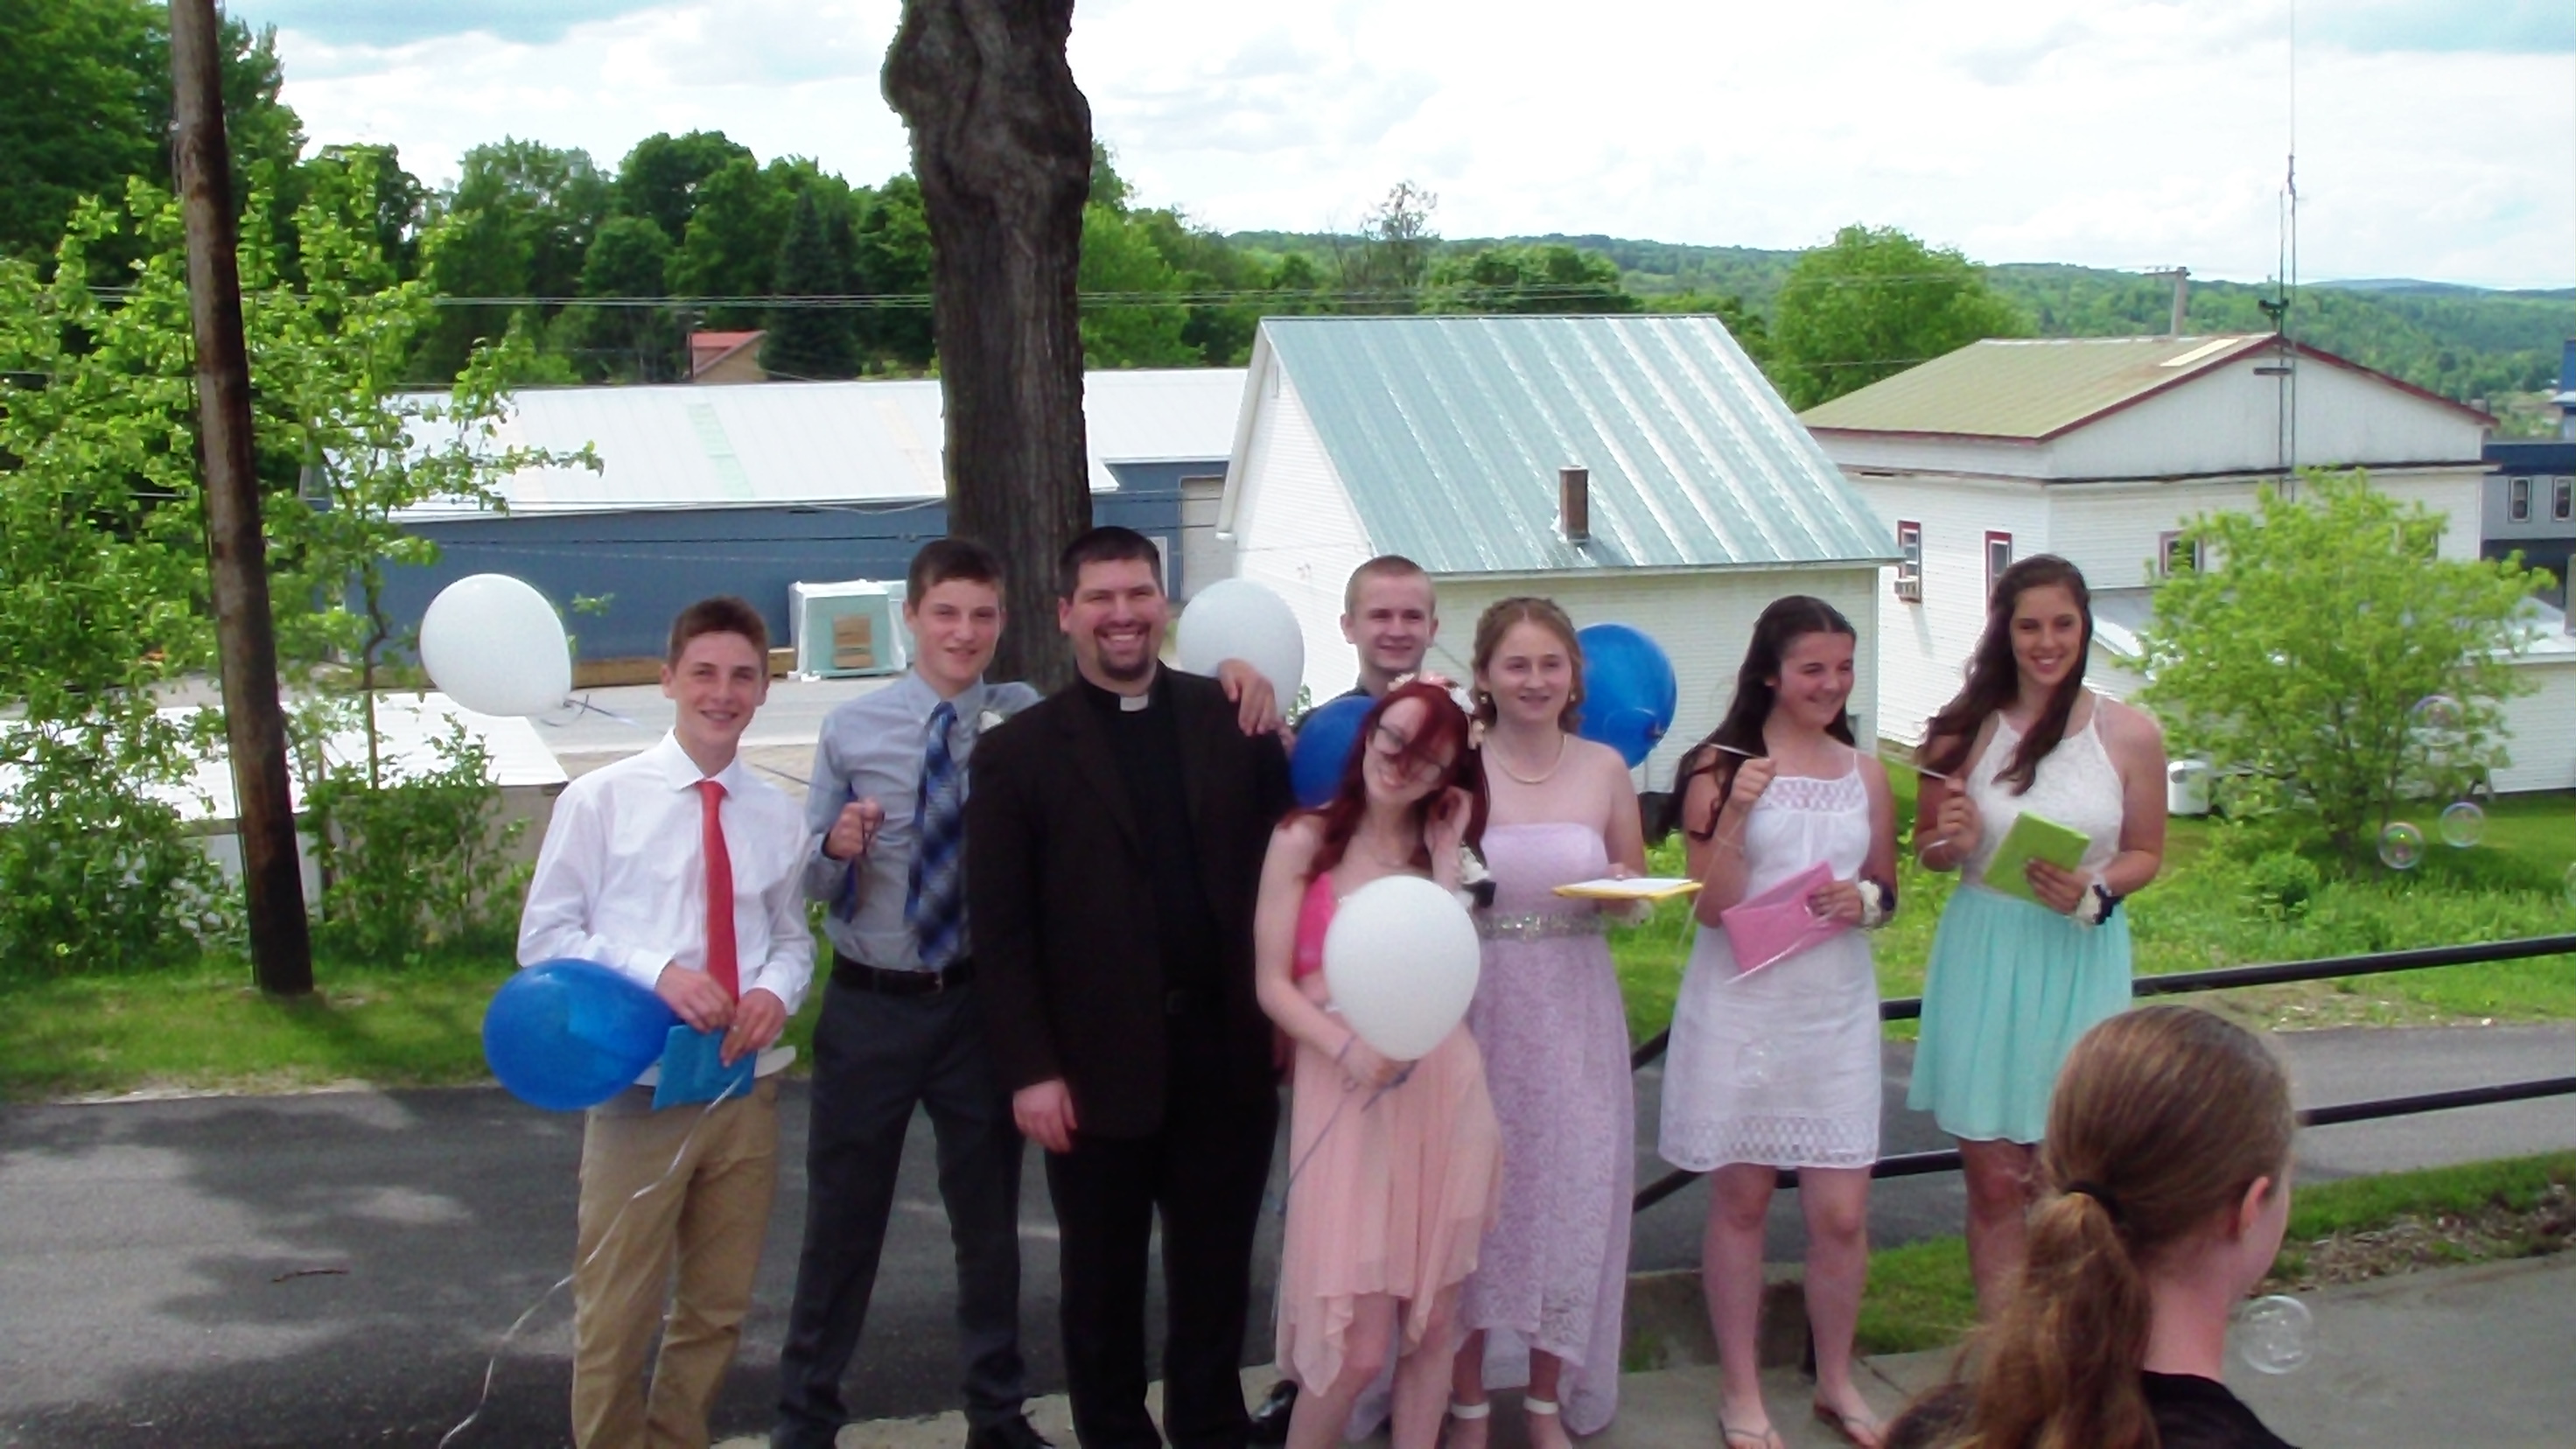 Class of 2016 - Jack King, Gage Coe, Josh Kelley, Bridgette Groff, Hannah Lantagne, Shelby Fortin, Emma Poginy and (not pictured) Jericho Ladd w/ Fr. Tim Naples